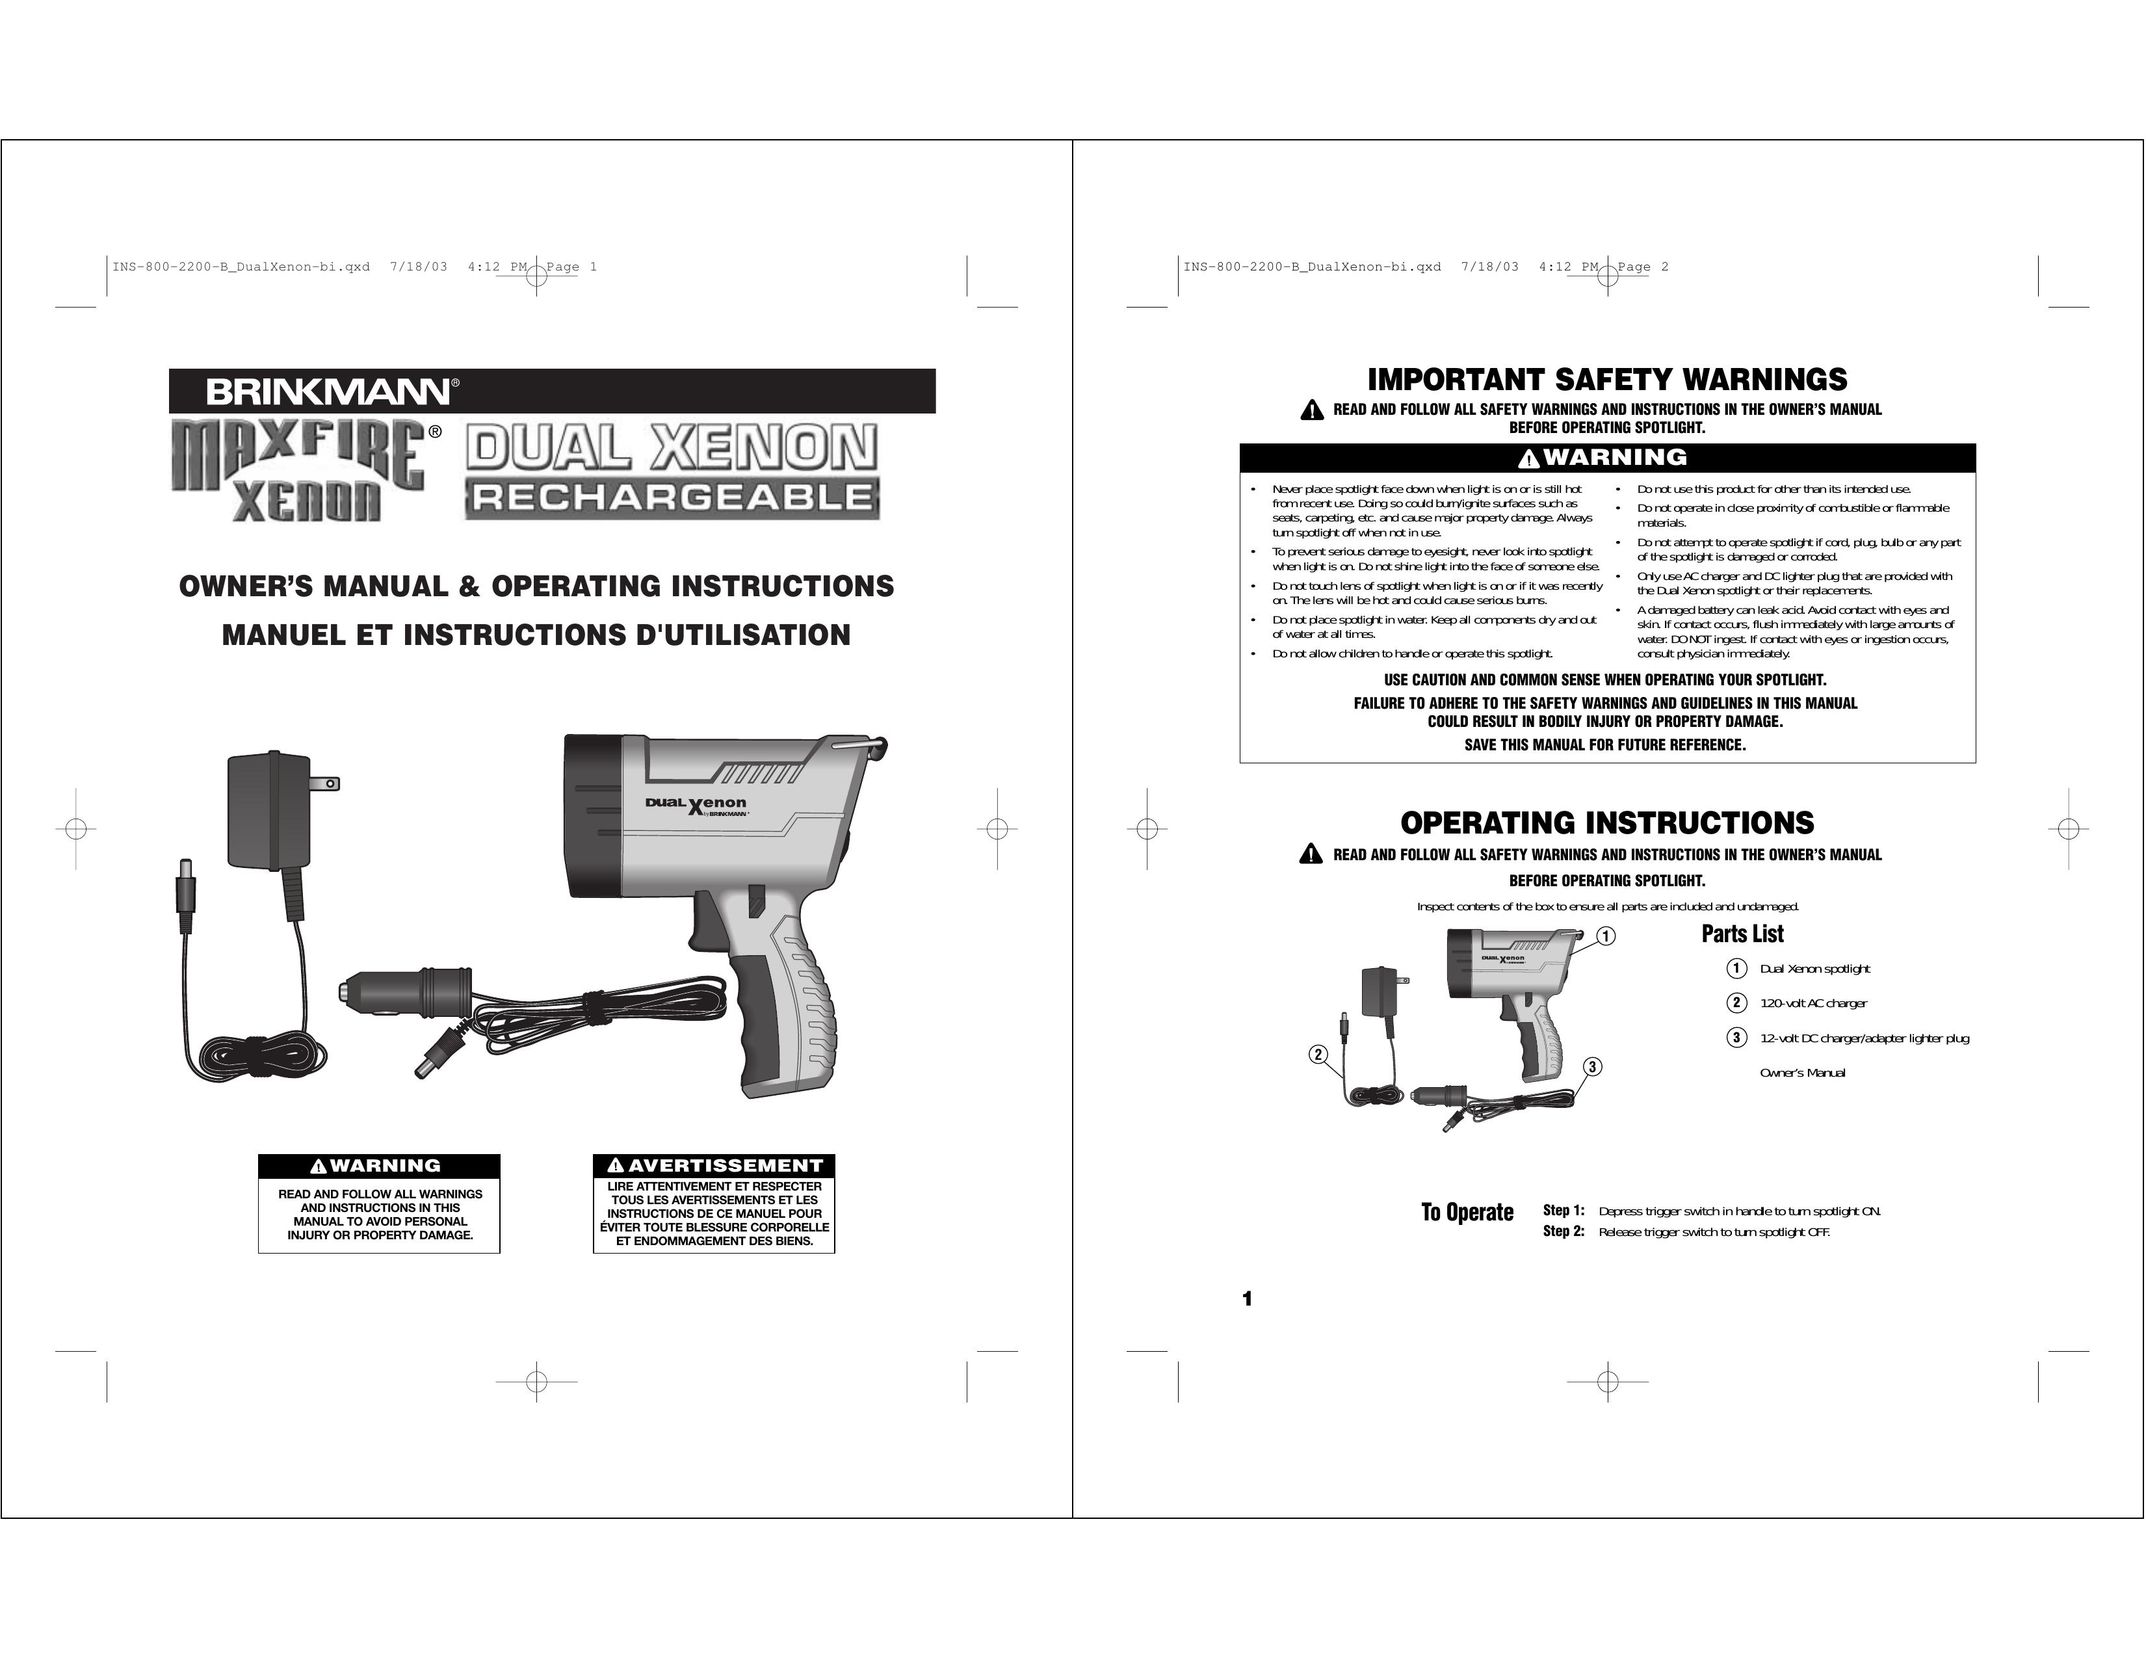 Brinkmann INS-800-2200-B Home Safety Product User Manual